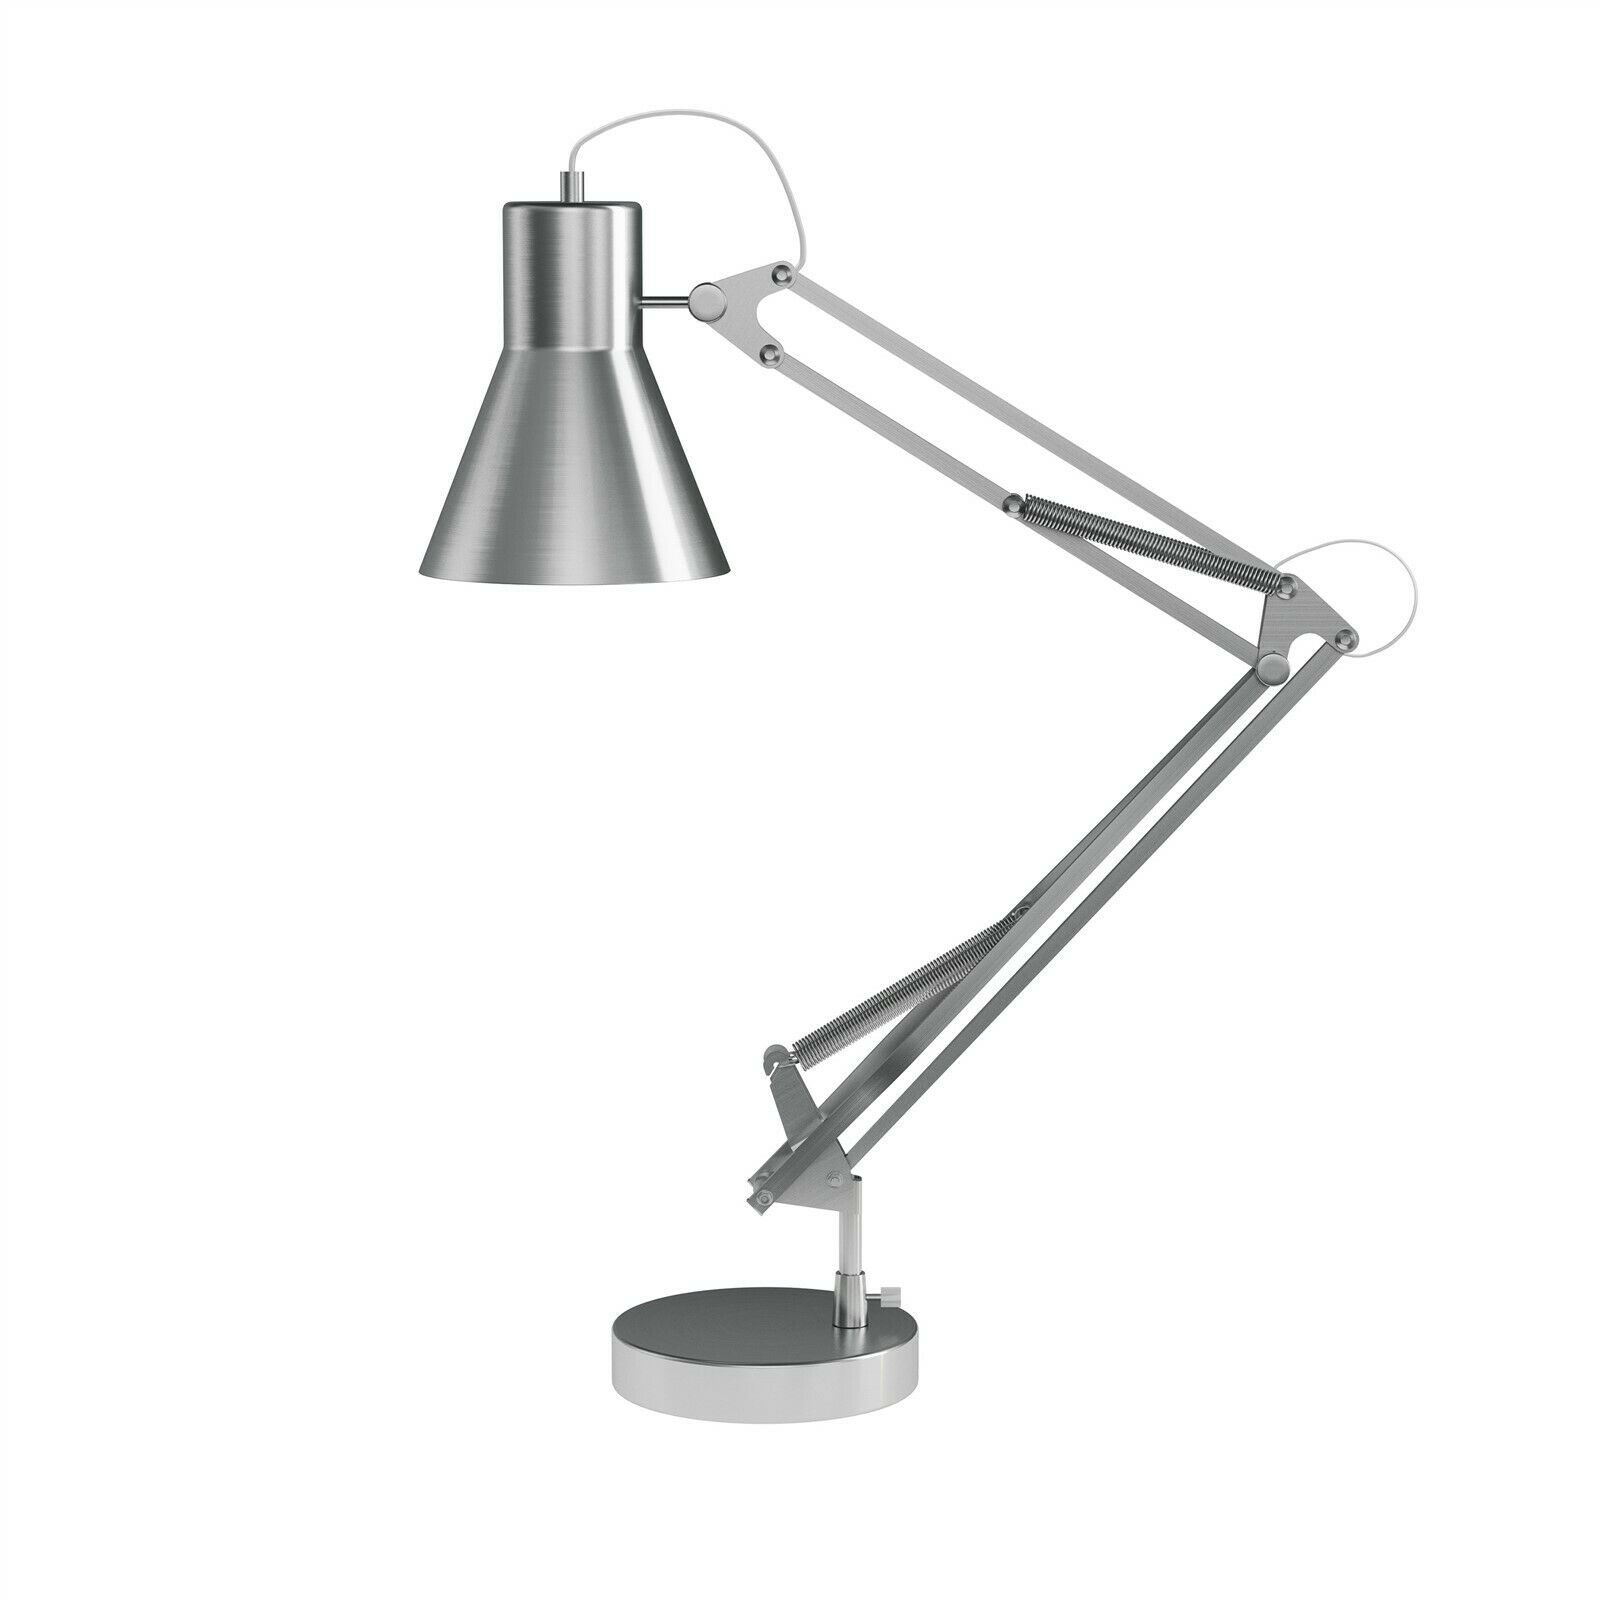 Architect Desk Lamp Adjustable Swing Arm Table Light Bright 400 Lumens Led Bulb in dimensions 1600 X 1600